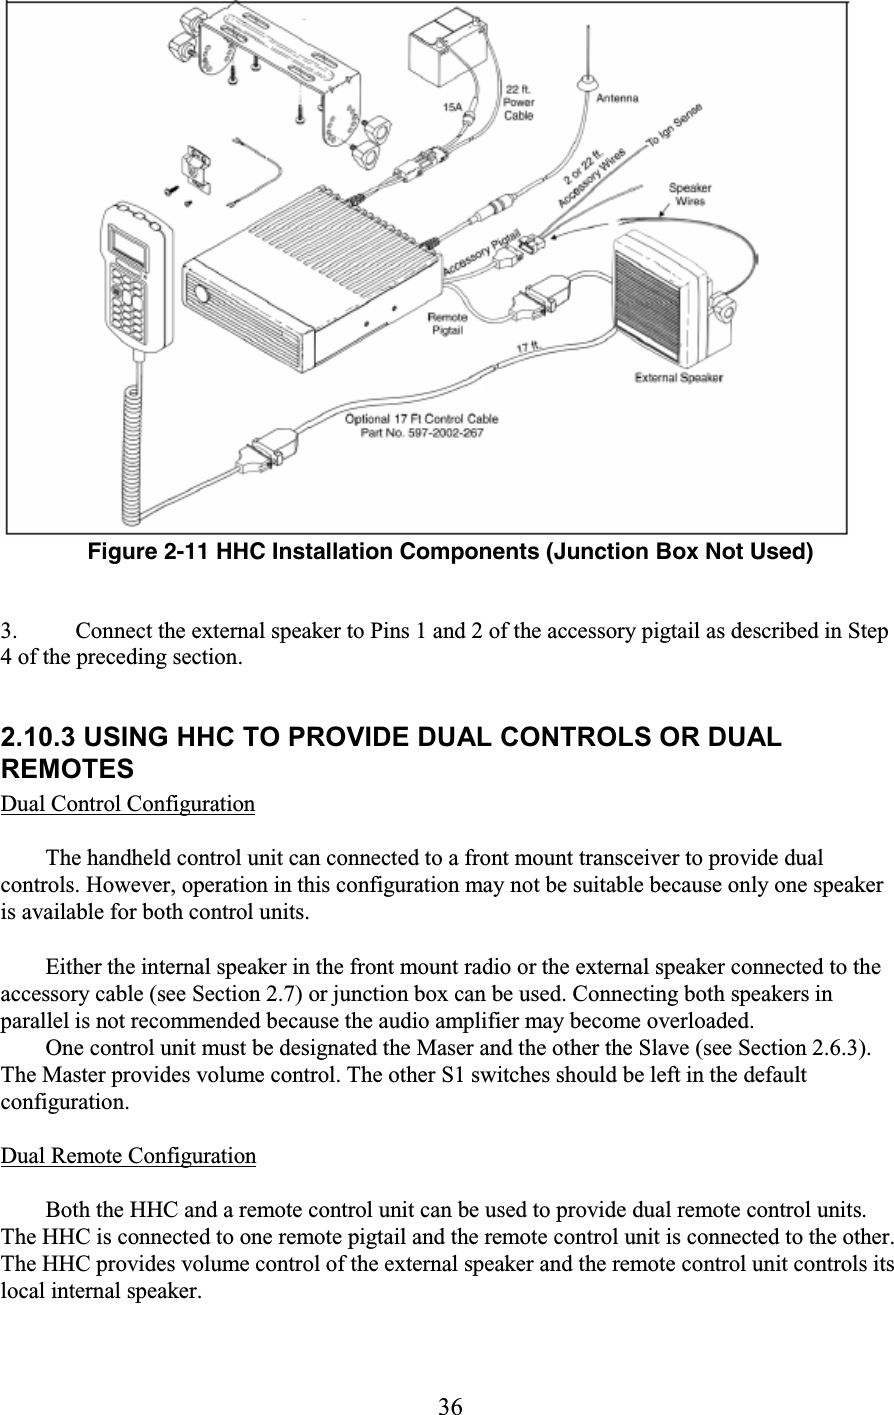 36  Figure 2-11 HHC Installation Components (Junction Box Not Used)   3. Connect the external speaker to Pins 1 and 2 of the accessory pigtail as described in Step 4 of the preceding section.   2.10.3 USING HHC TO PROVIDE DUAL CONTROLS OR DUAL REMOTES  Dual Control Configuration  The handheld control unit can connected to a front mount transceiver to provide dual controls. However, operation in this configuration may not be suitable because only one speaker is available for both control units.  Either the internal speaker in the front mount radio or the external speaker connected to the accessory cable (see Section 2.7) or junction box can be used. Connecting both speakers in parallel is not recommended because the audio amplifier may become overloaded.  One control unit must be designated the Maser and the other the Slave (see Section 2.6.3). The Master provides volume control. The other S1 switches should be left in the default configuration.  Dual Remote Configuration  Both the HHC and a remote control unit can be used to provide dual remote control units. The HHC is connected to one remote pigtail and the remote control unit is connected to the other. The HHC provides volume control of the external speaker and the remote control unit controls its local internal speaker.  